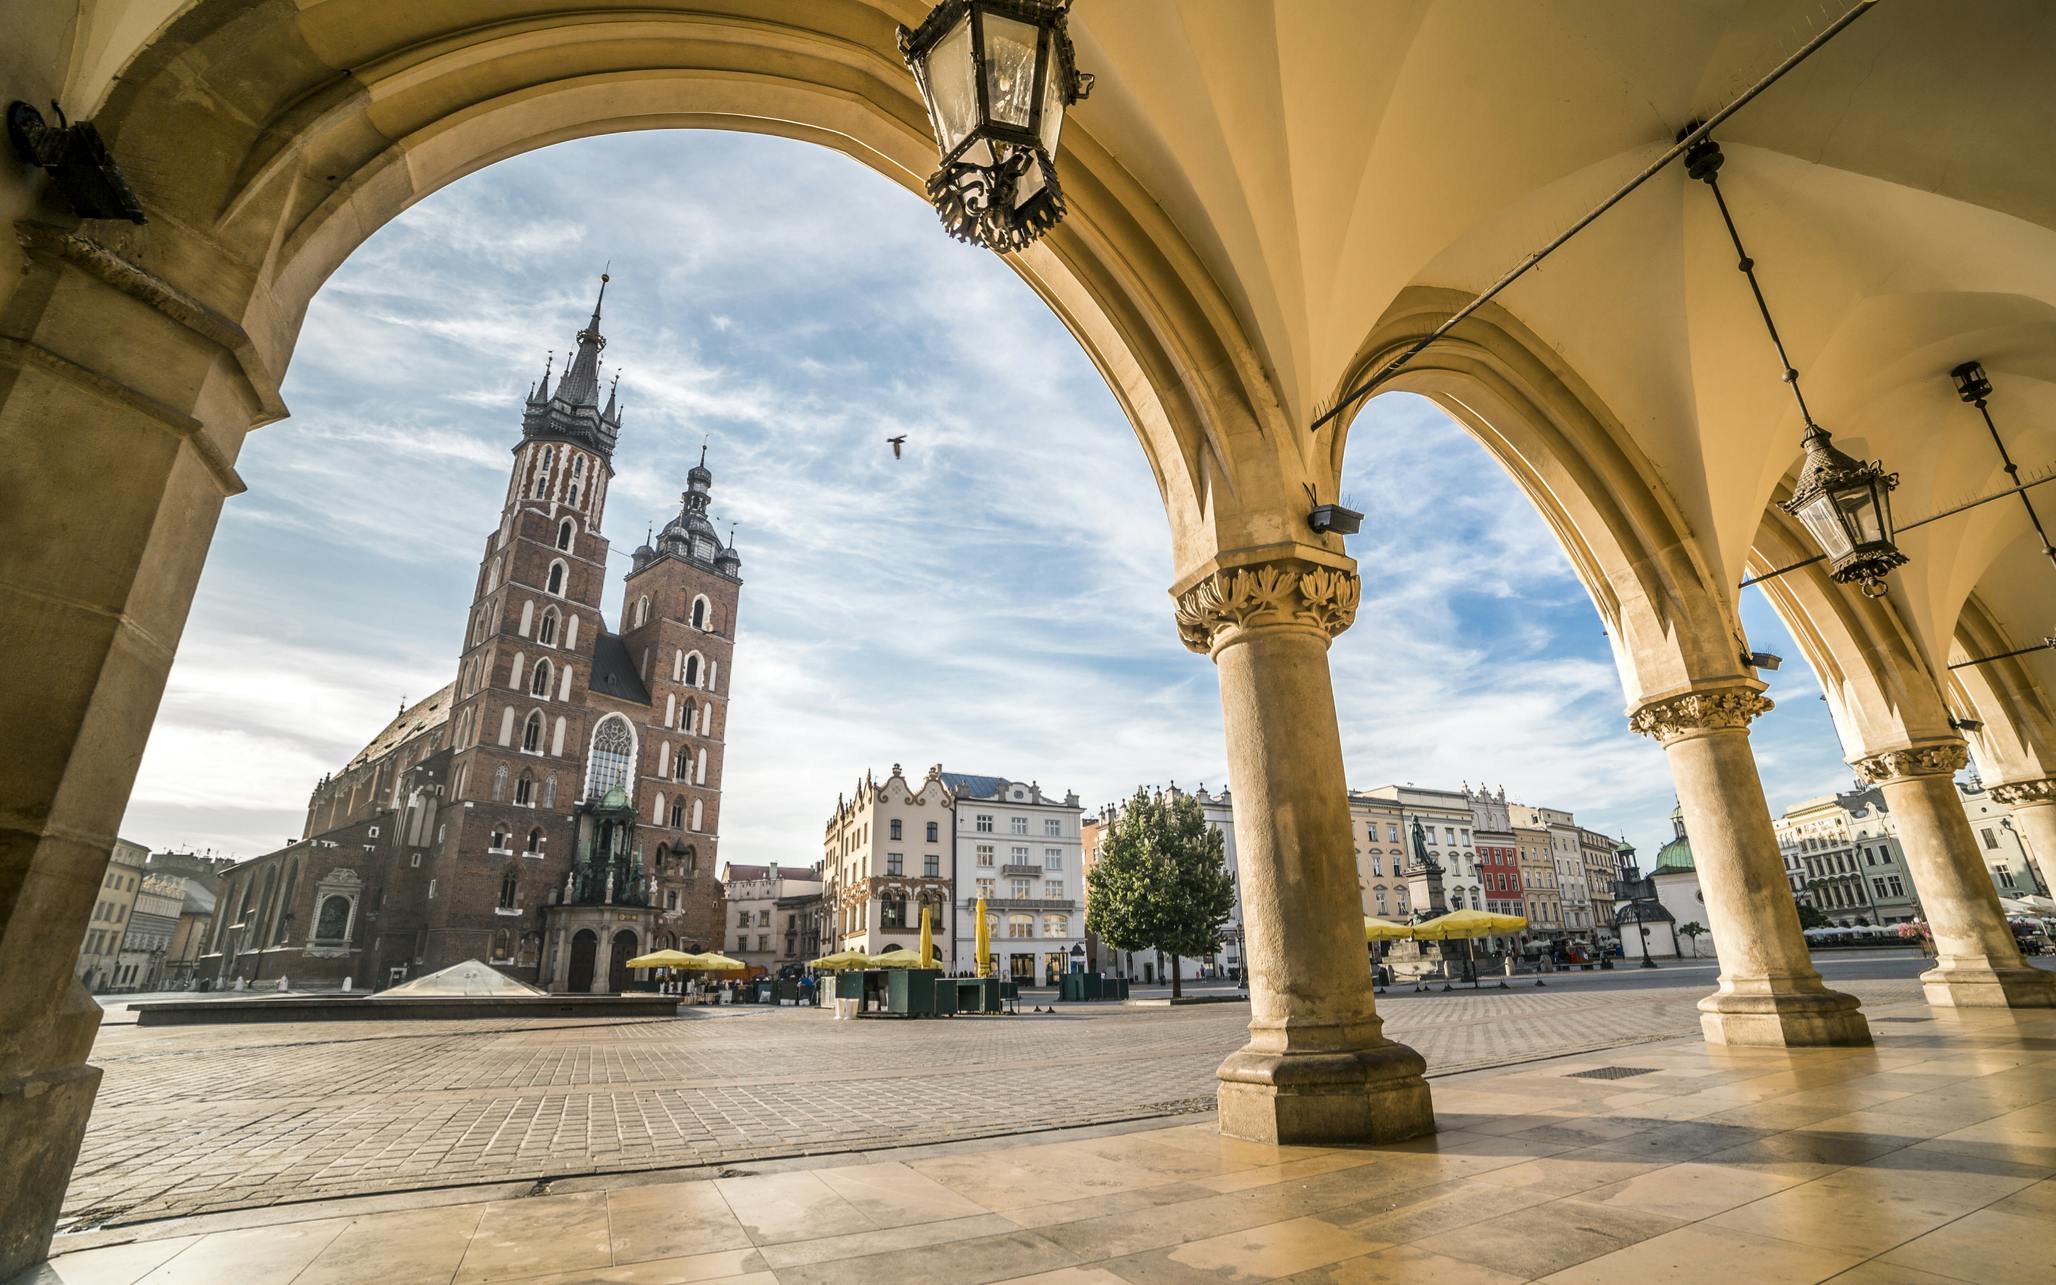 3-day Museum & Attraction Pass in Krakow